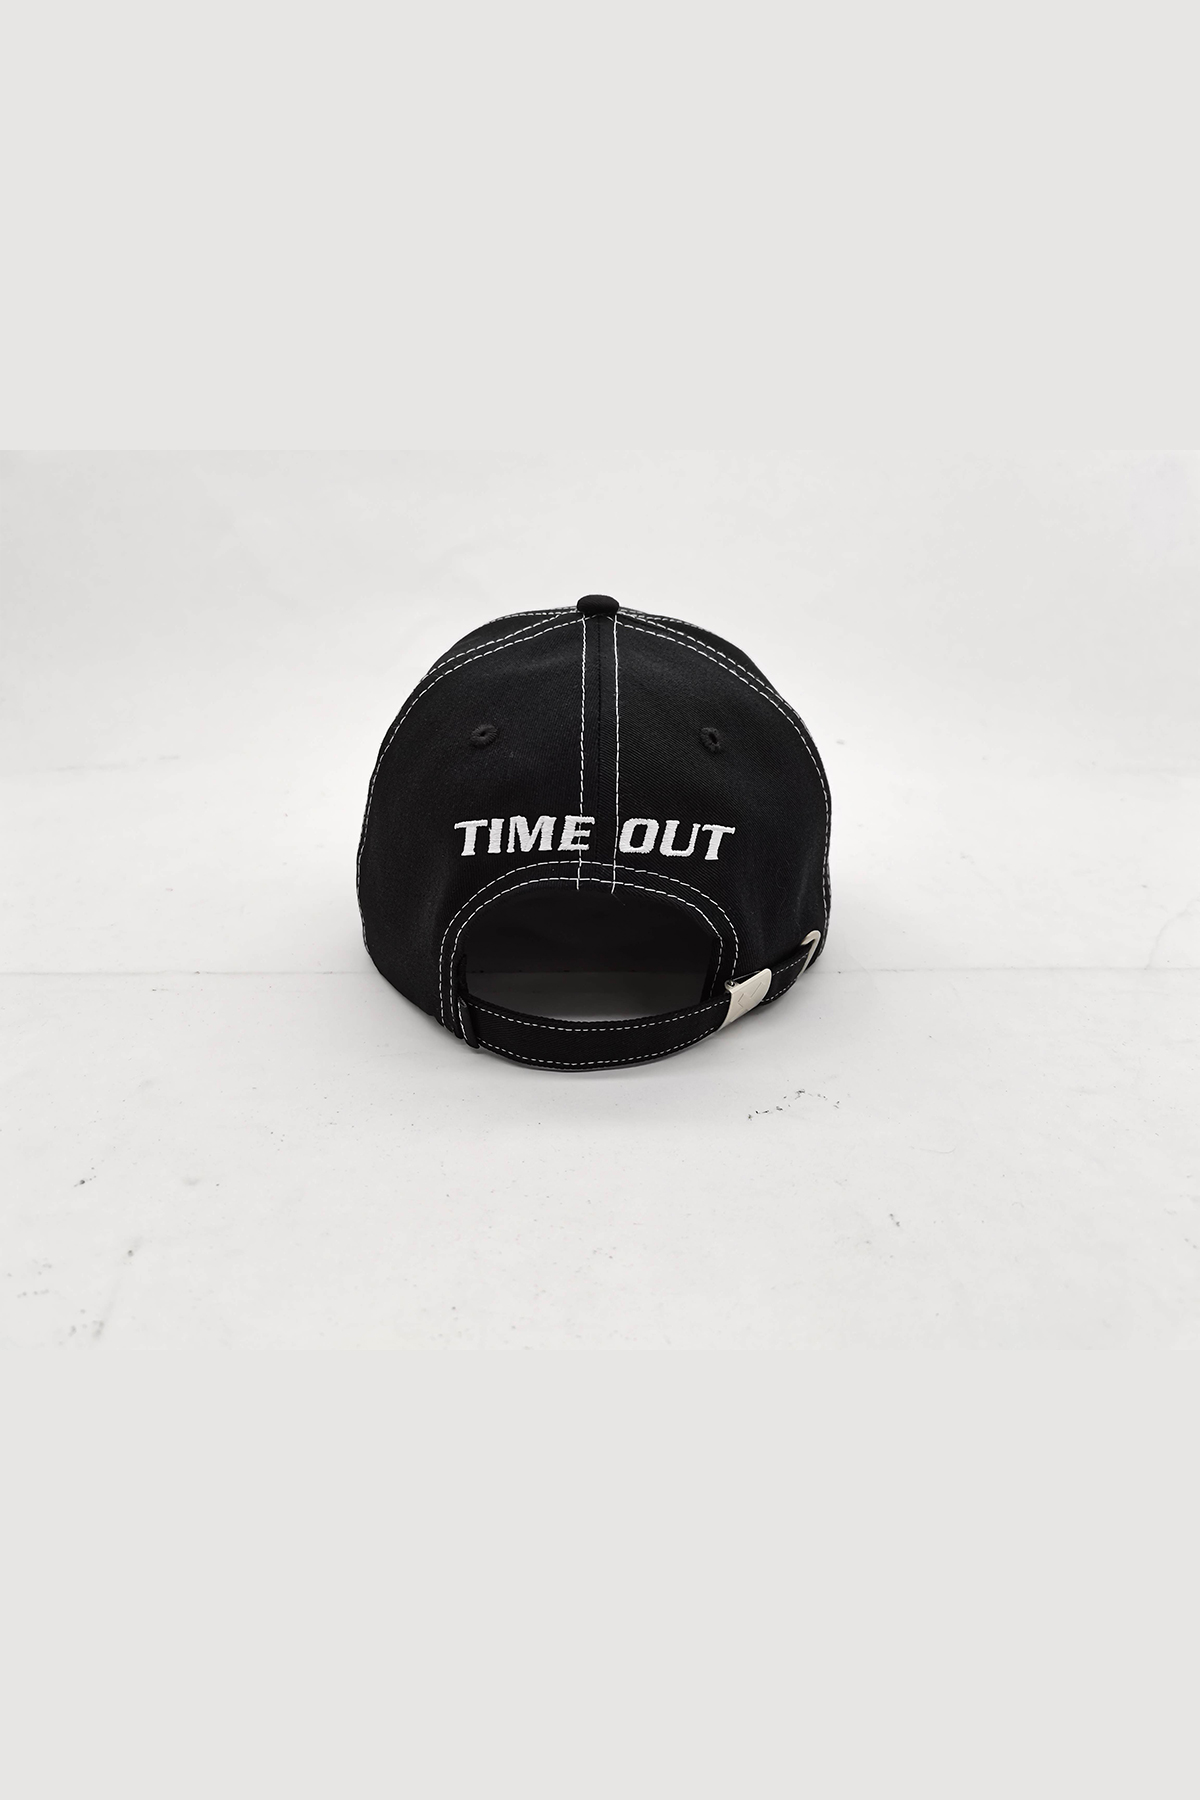 Time-Out-X-Cotton-Gym-Cap-Black-with-White-logo—Back